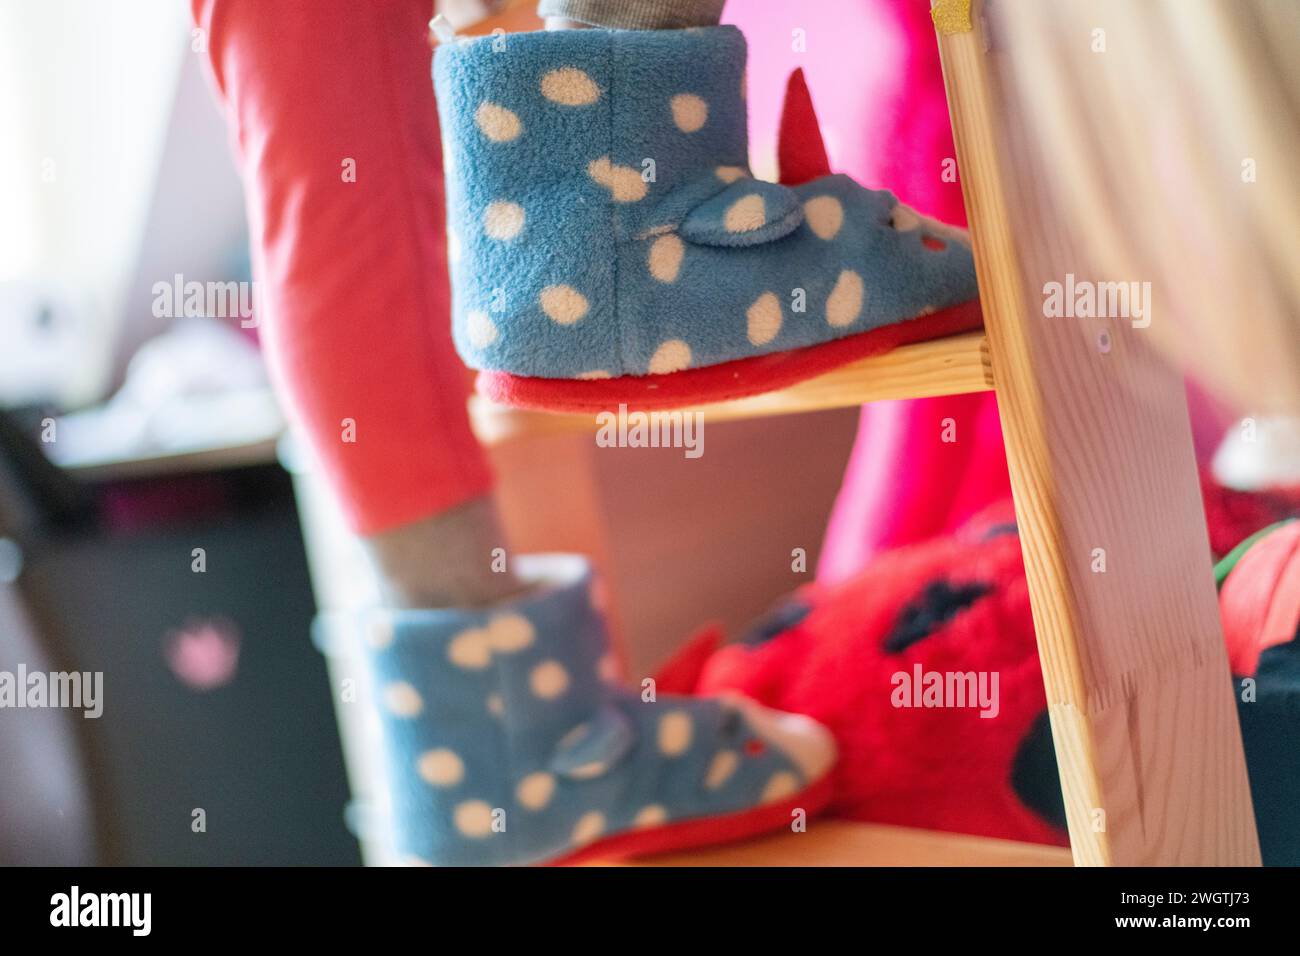 young girl climbing her bunkbed with fluffy slipper shoes on Stock Photo